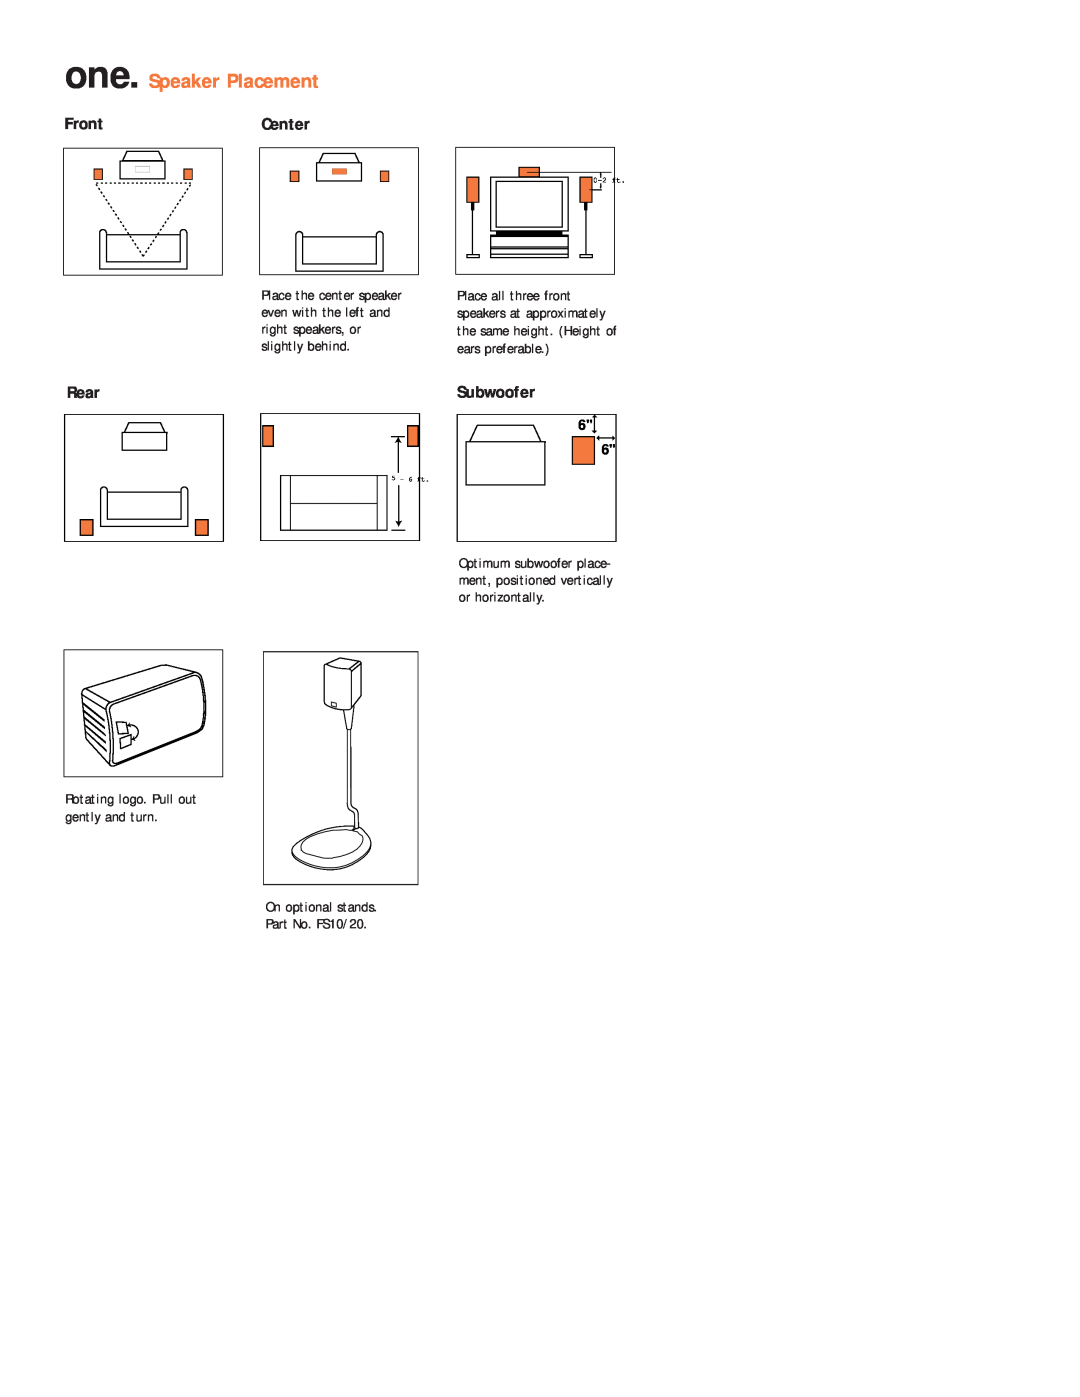 JBL ESC200 setup guide one. Speaker Placement, FrontCenter, Rear, Rotating logo. Pull out gently and turn 